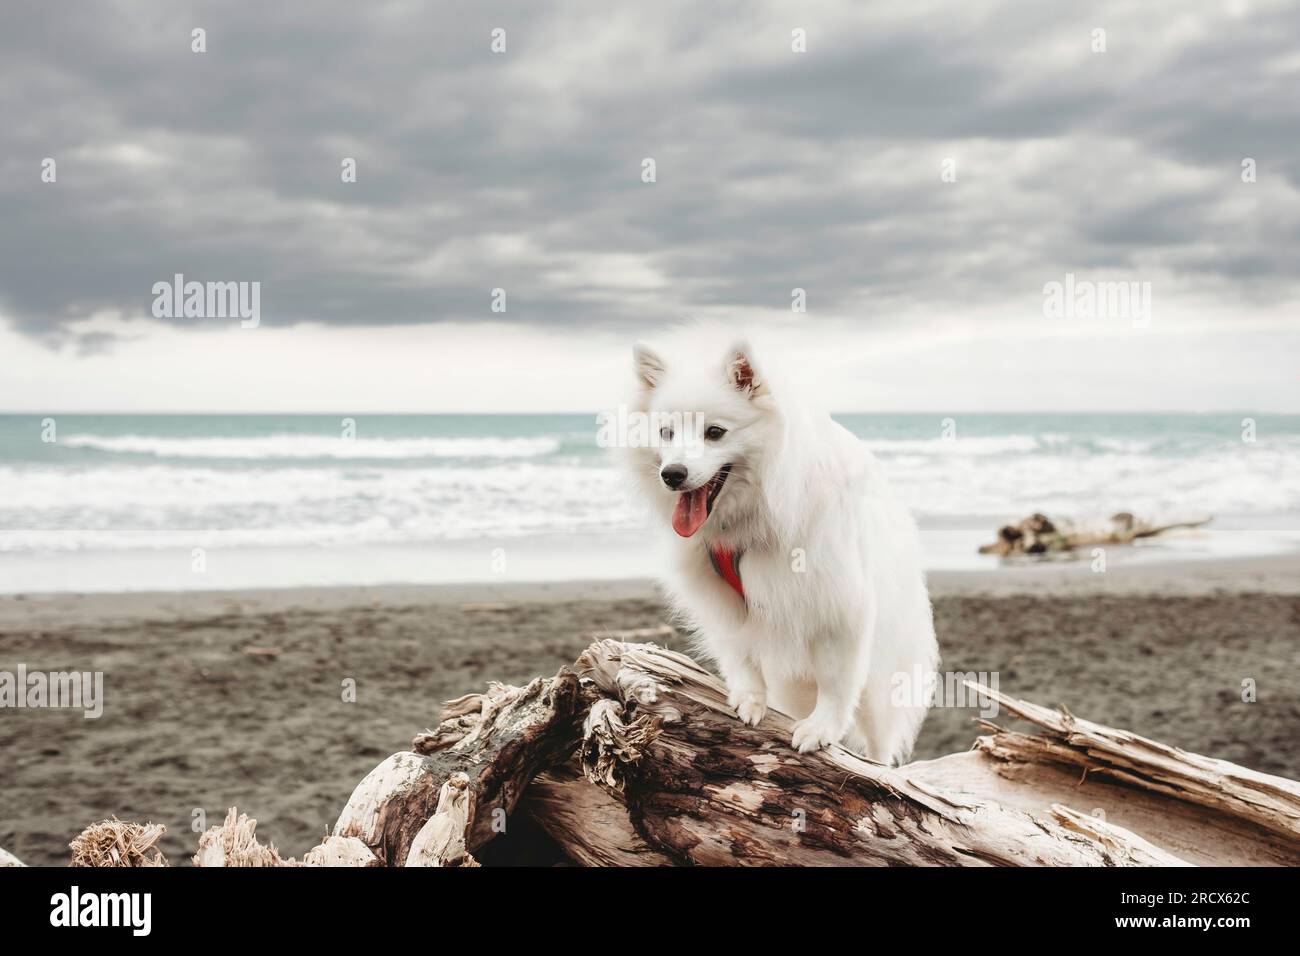 Small fluffy white dog sitting on driftwood at the beach Stock Photo